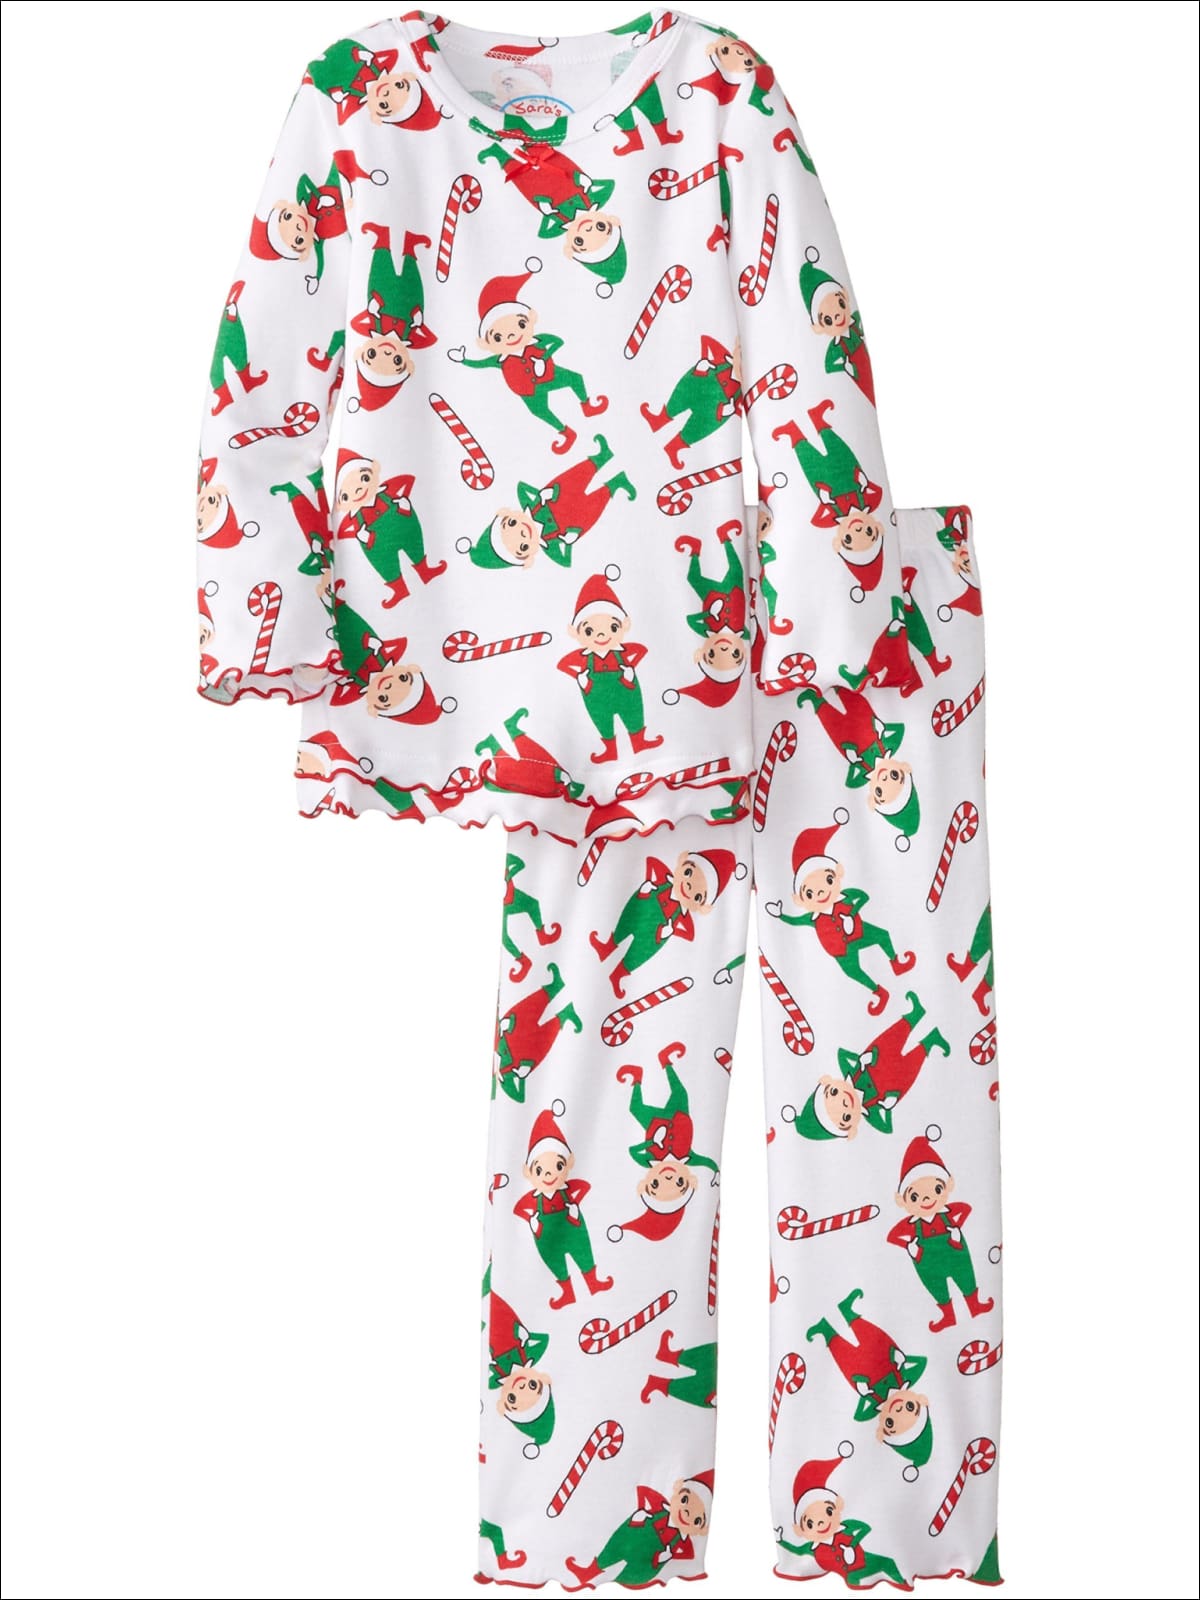 Saras Prints Little Girls Holiday Elves Ruffle Top and Pant